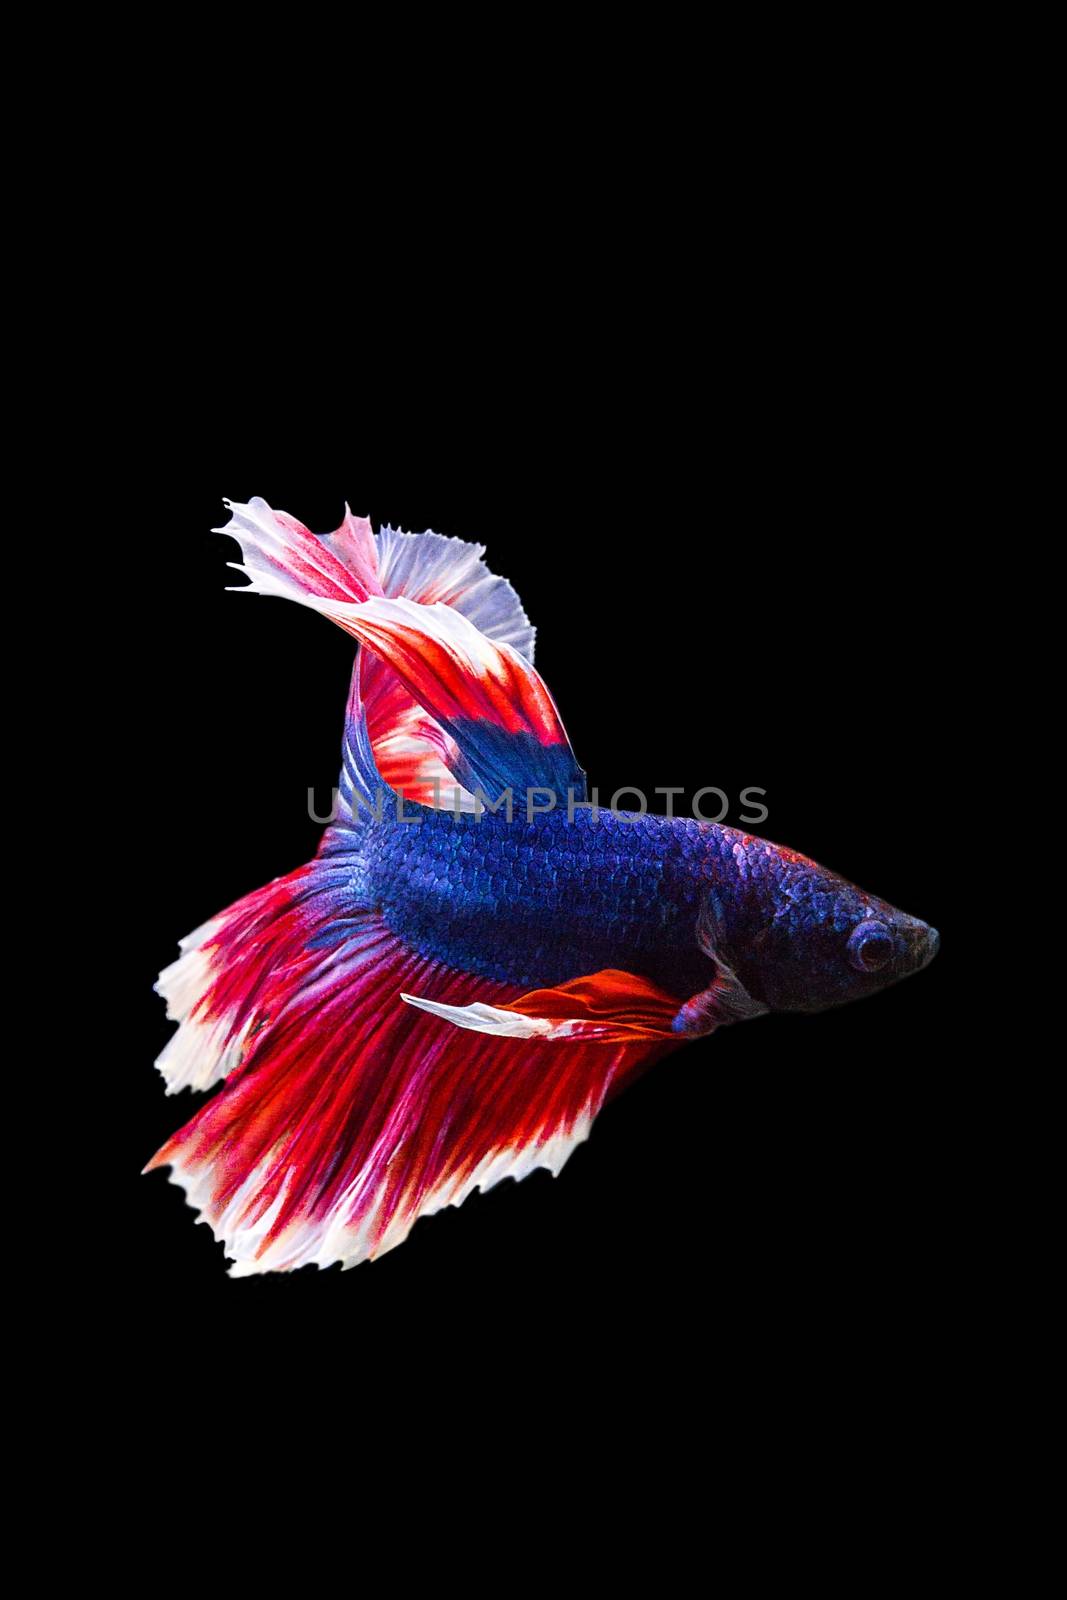 image of betta fish isolated on black background, action moving moment of Red Blue Rose Tail Betta, Siamese Fighting Fish